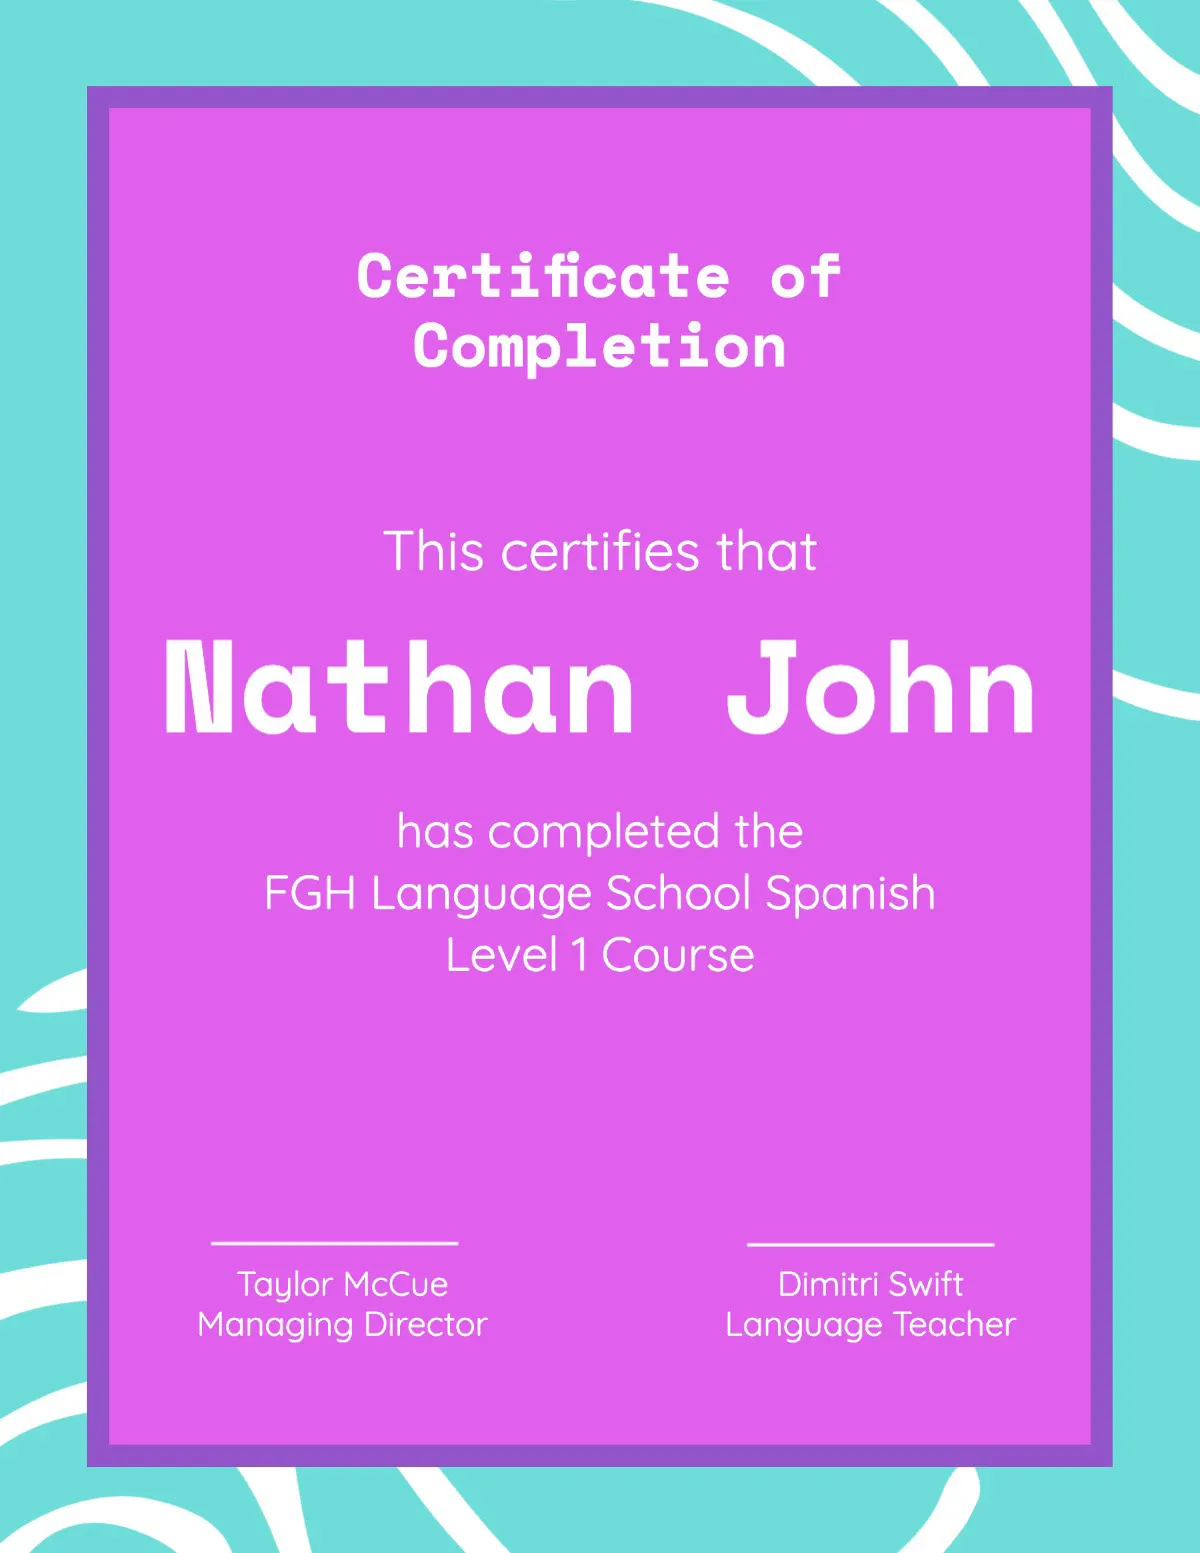 Purple & Teal Bright Certificate of Completion